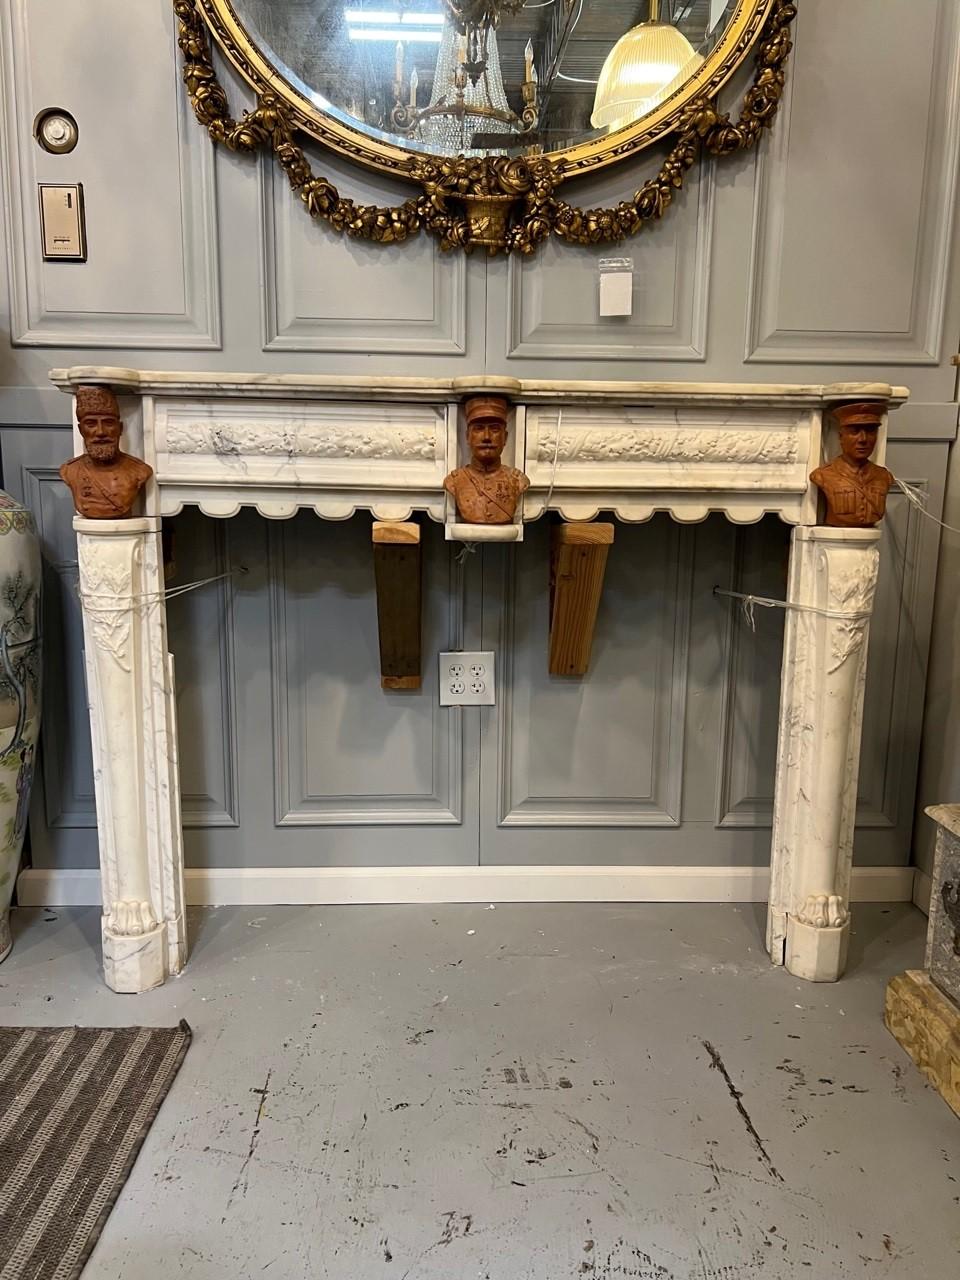 Amazing antique white Carrara marble fireplace mantel with three incredible terracotta busts, very unique and maybe one of a kind. The bust on the left looks to be a military leader or Russian Ruler. The center bust looks like a leader from France